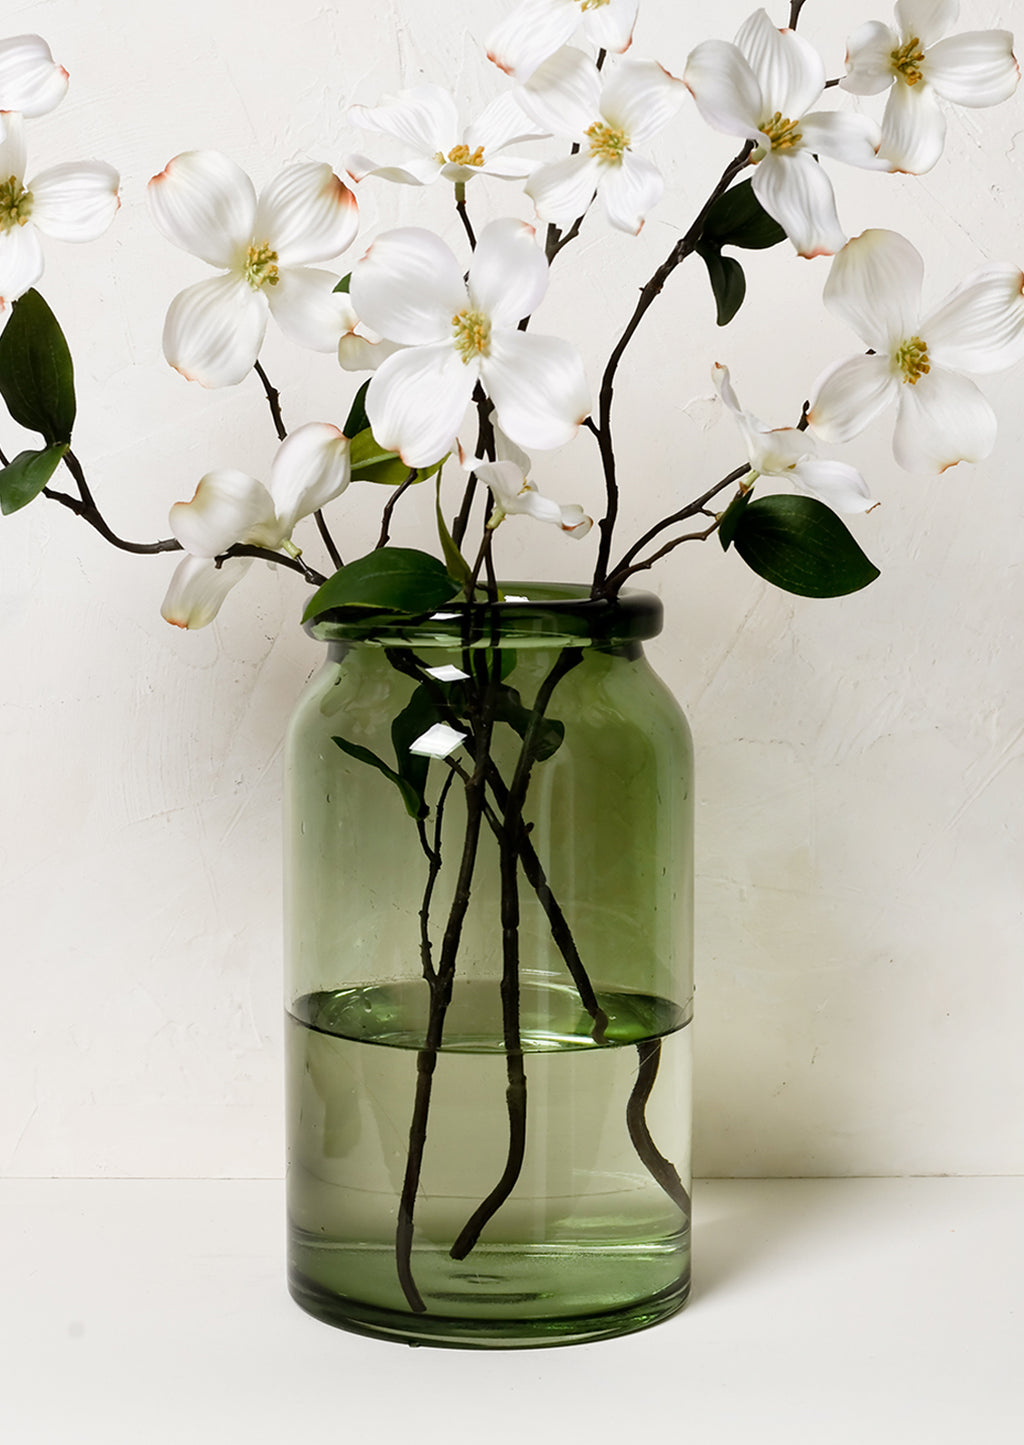 1: A tall green glass vase with dogwood branches.